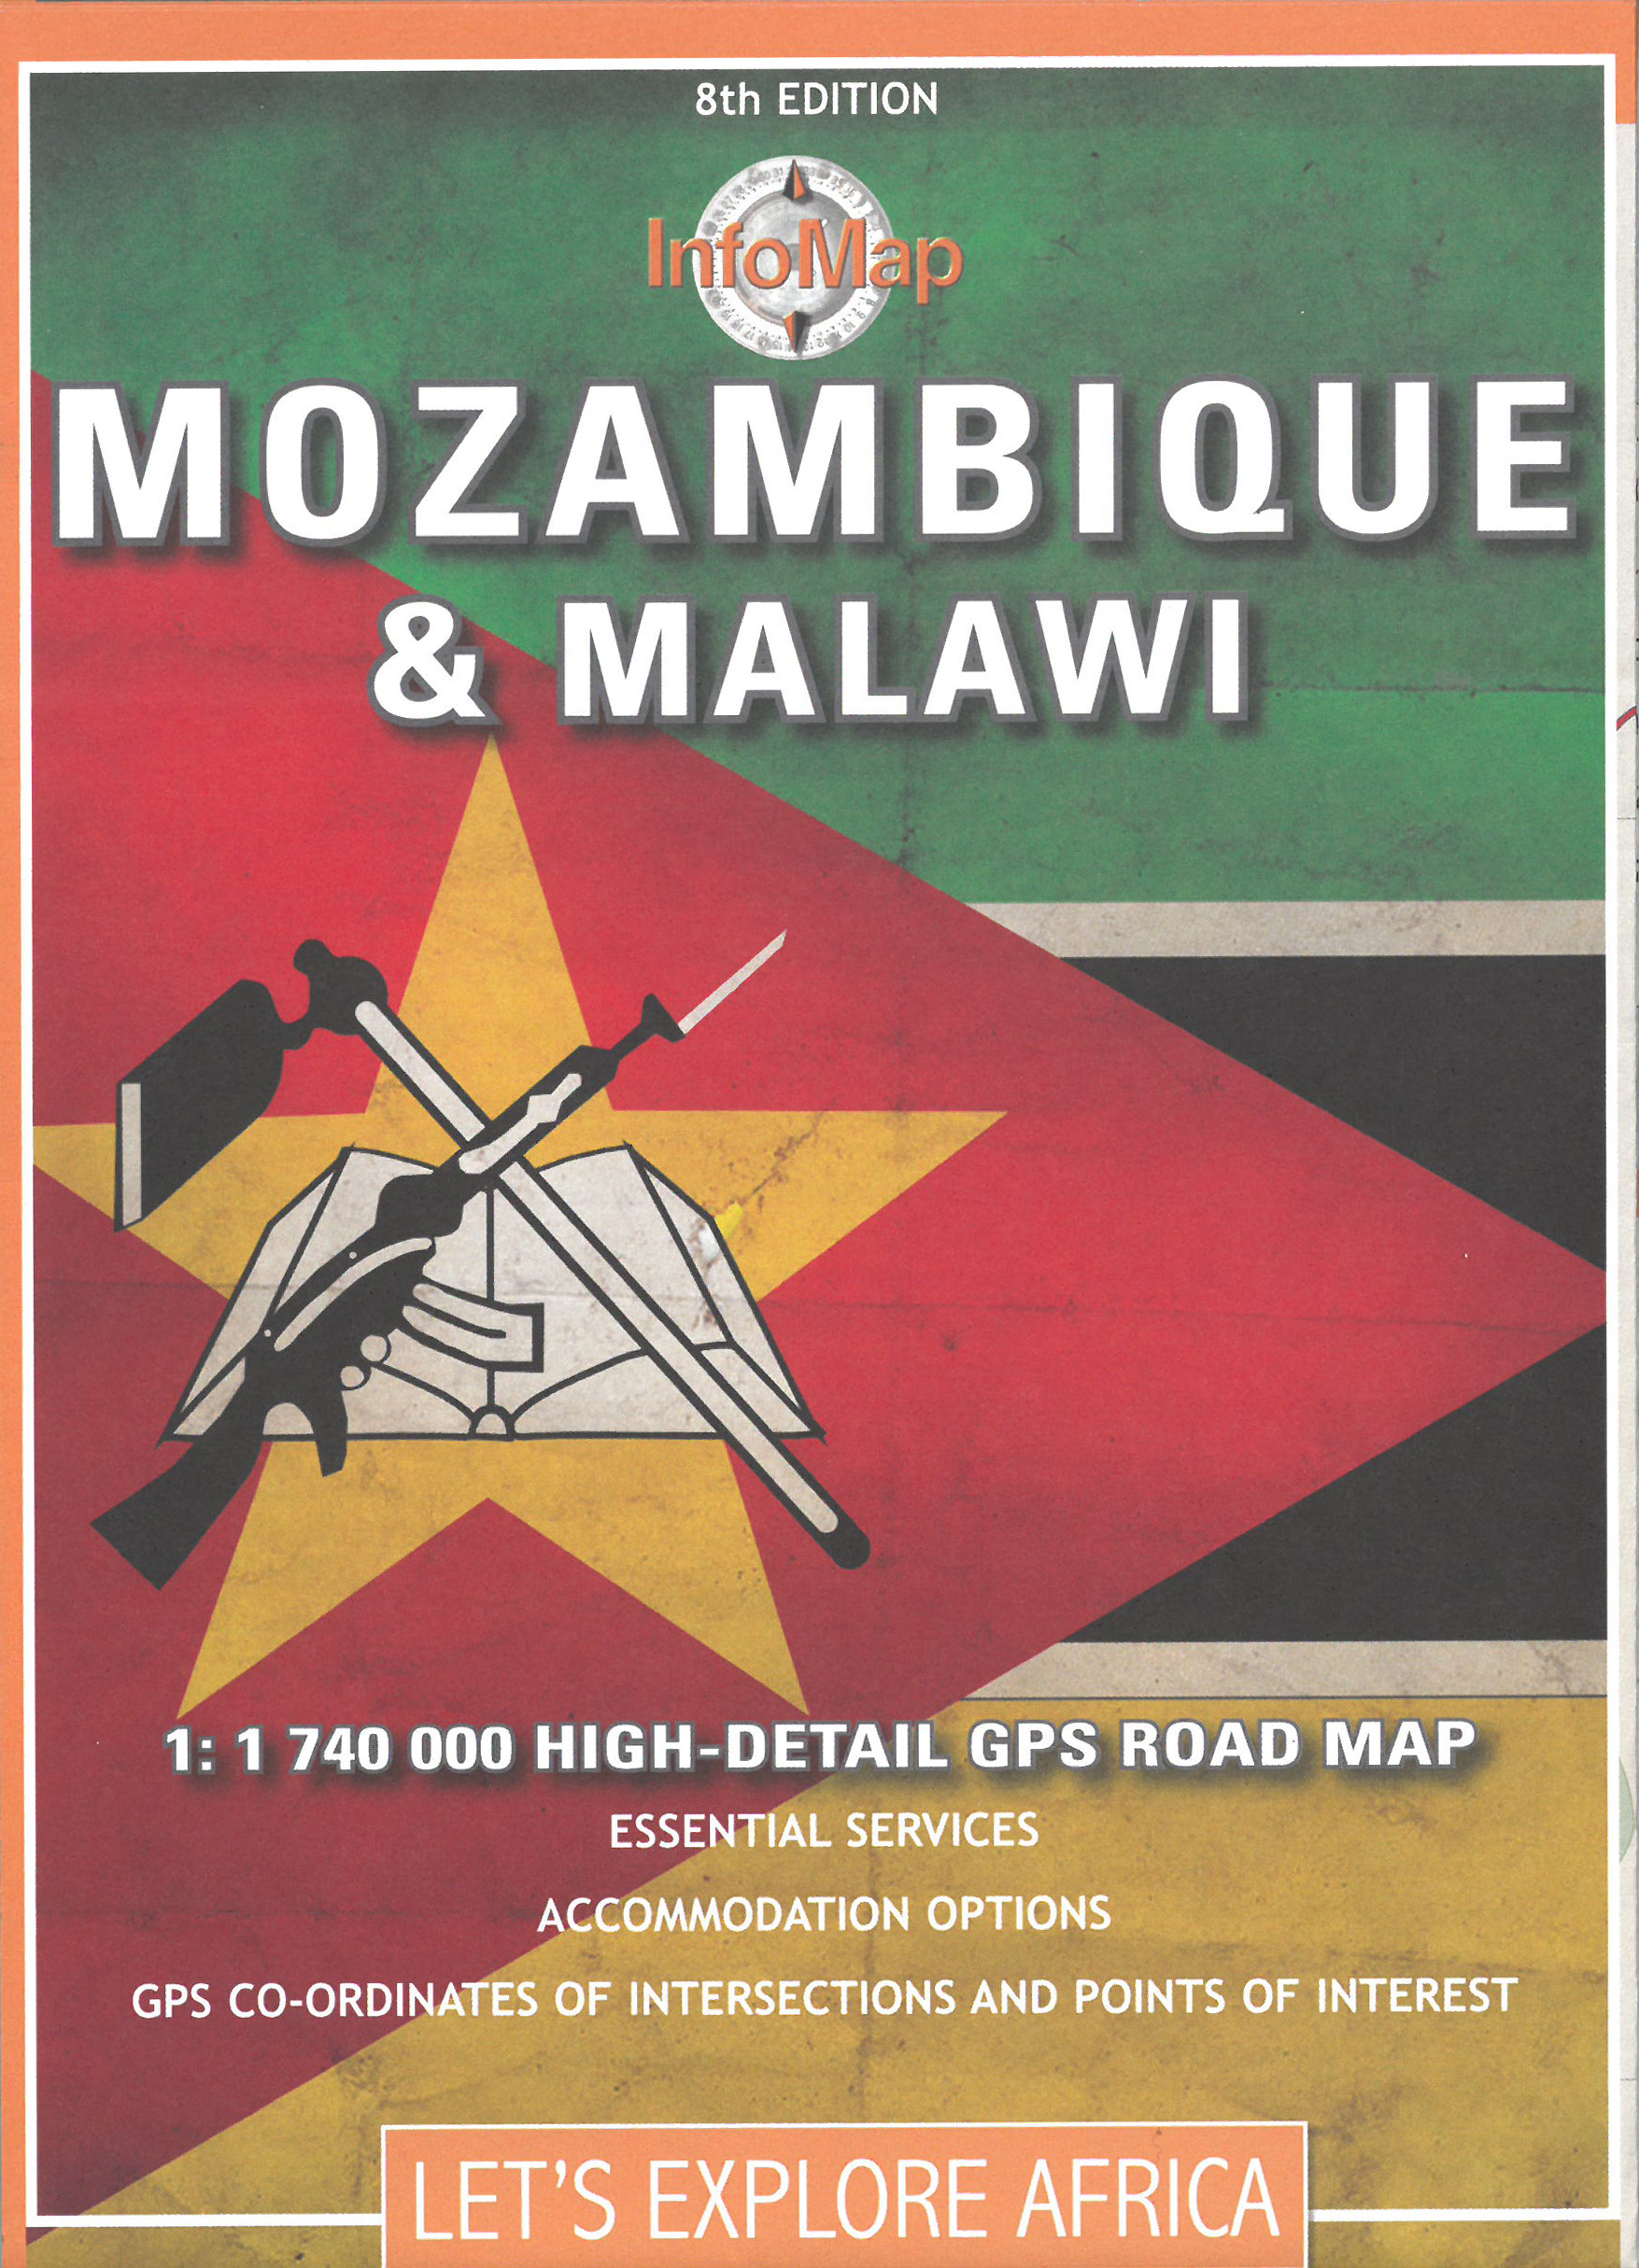 Mozambique and Malawi